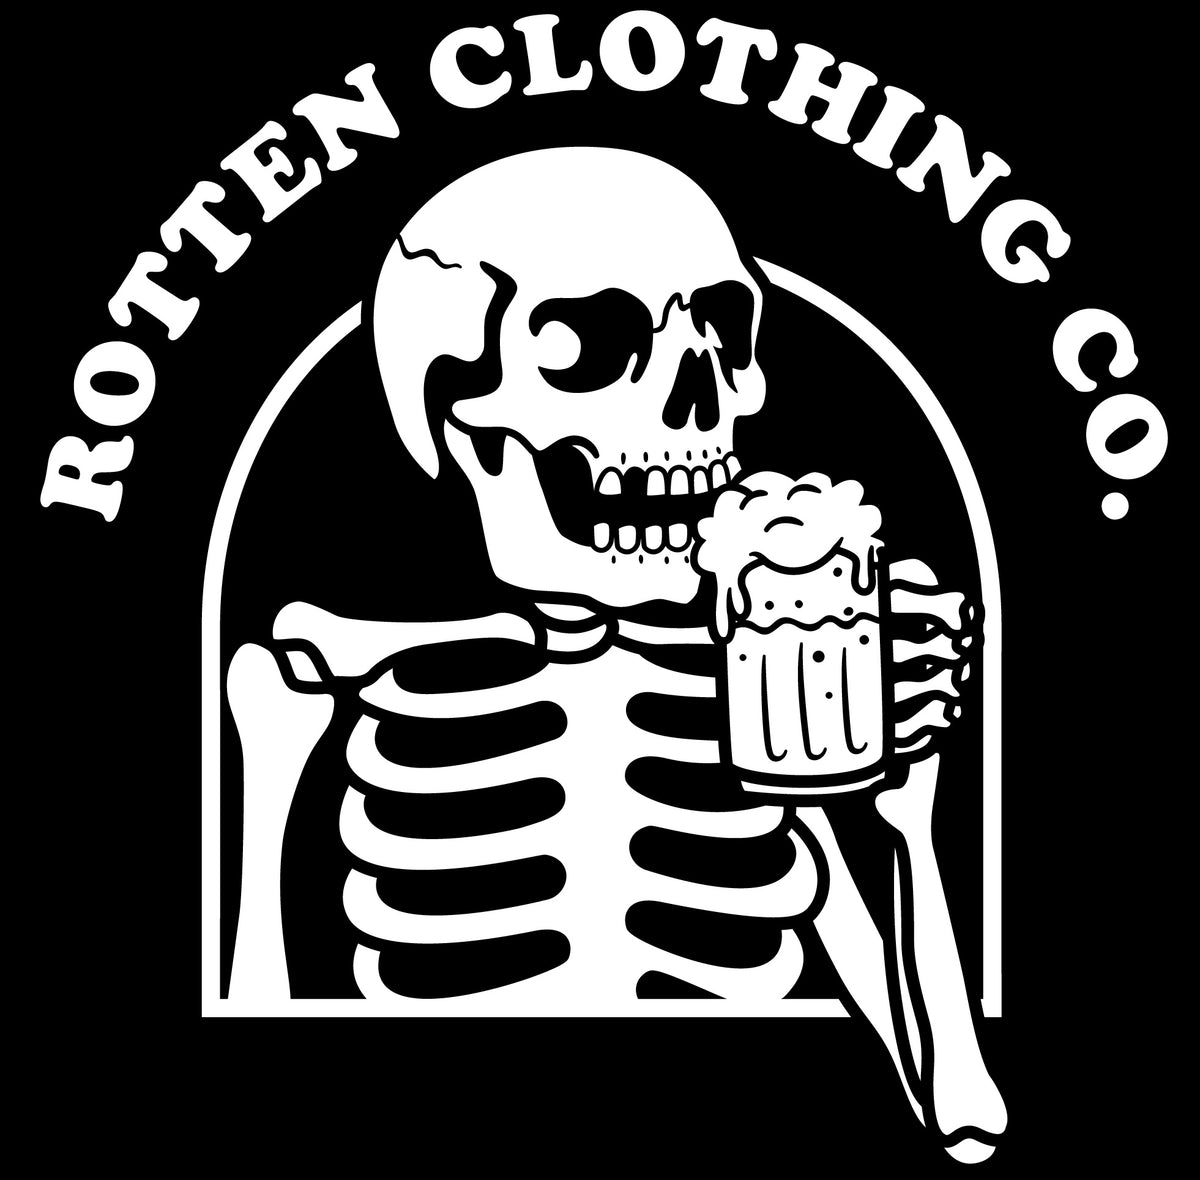 Rotten To The Core T-Shirt – Wearhouse Clothing Co